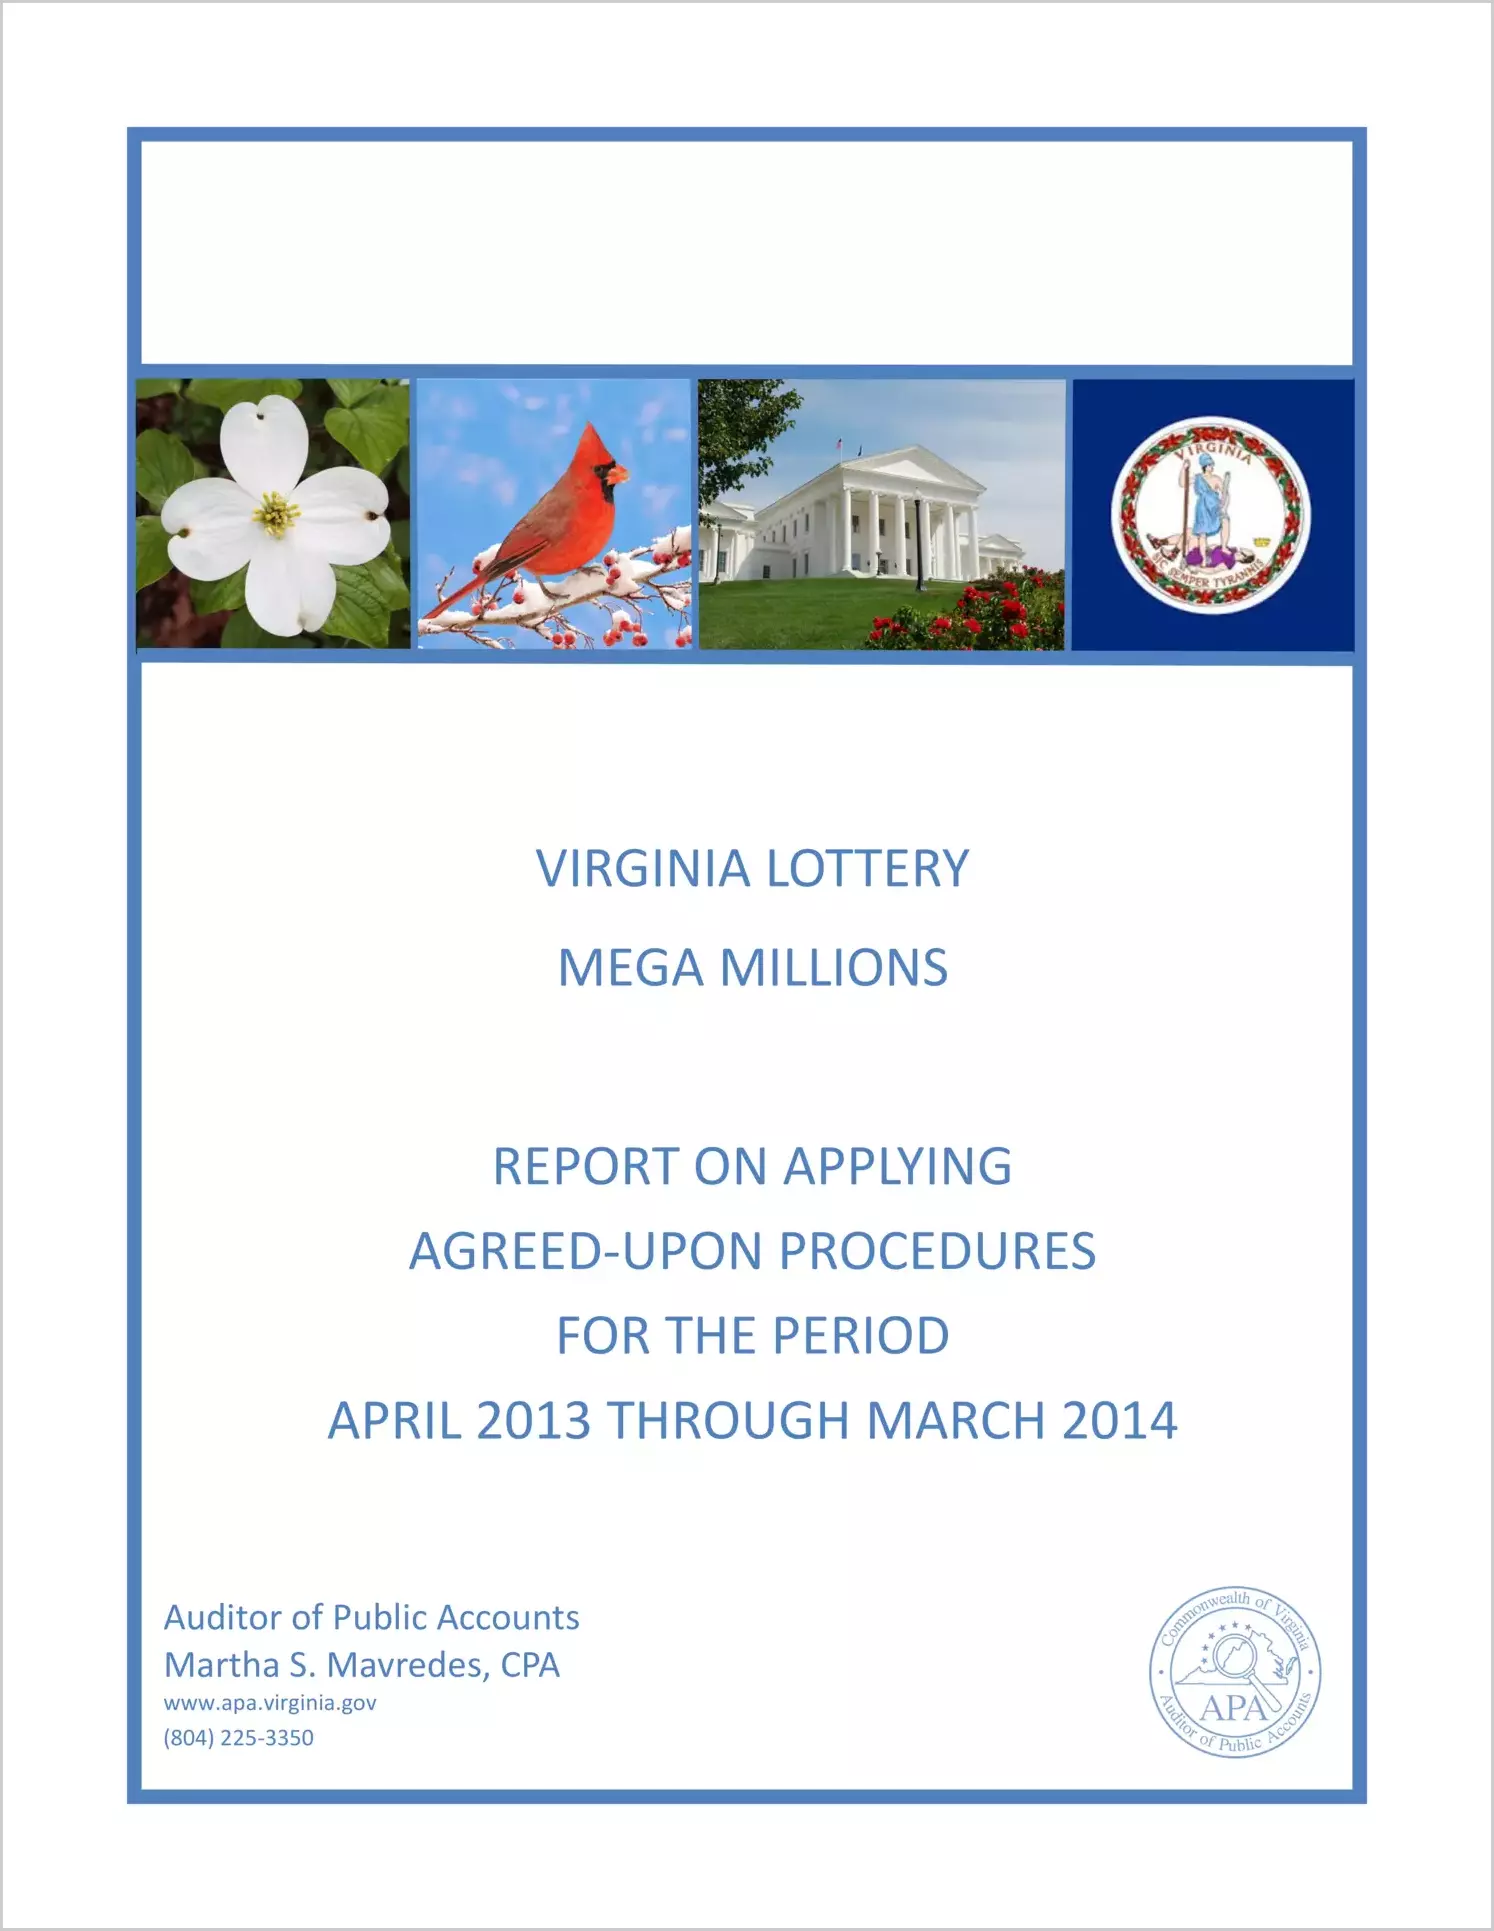 VA Lottery Mega Millions report on Applying Agreed-Upon Procedures for the period April, 2013 through March, 2014